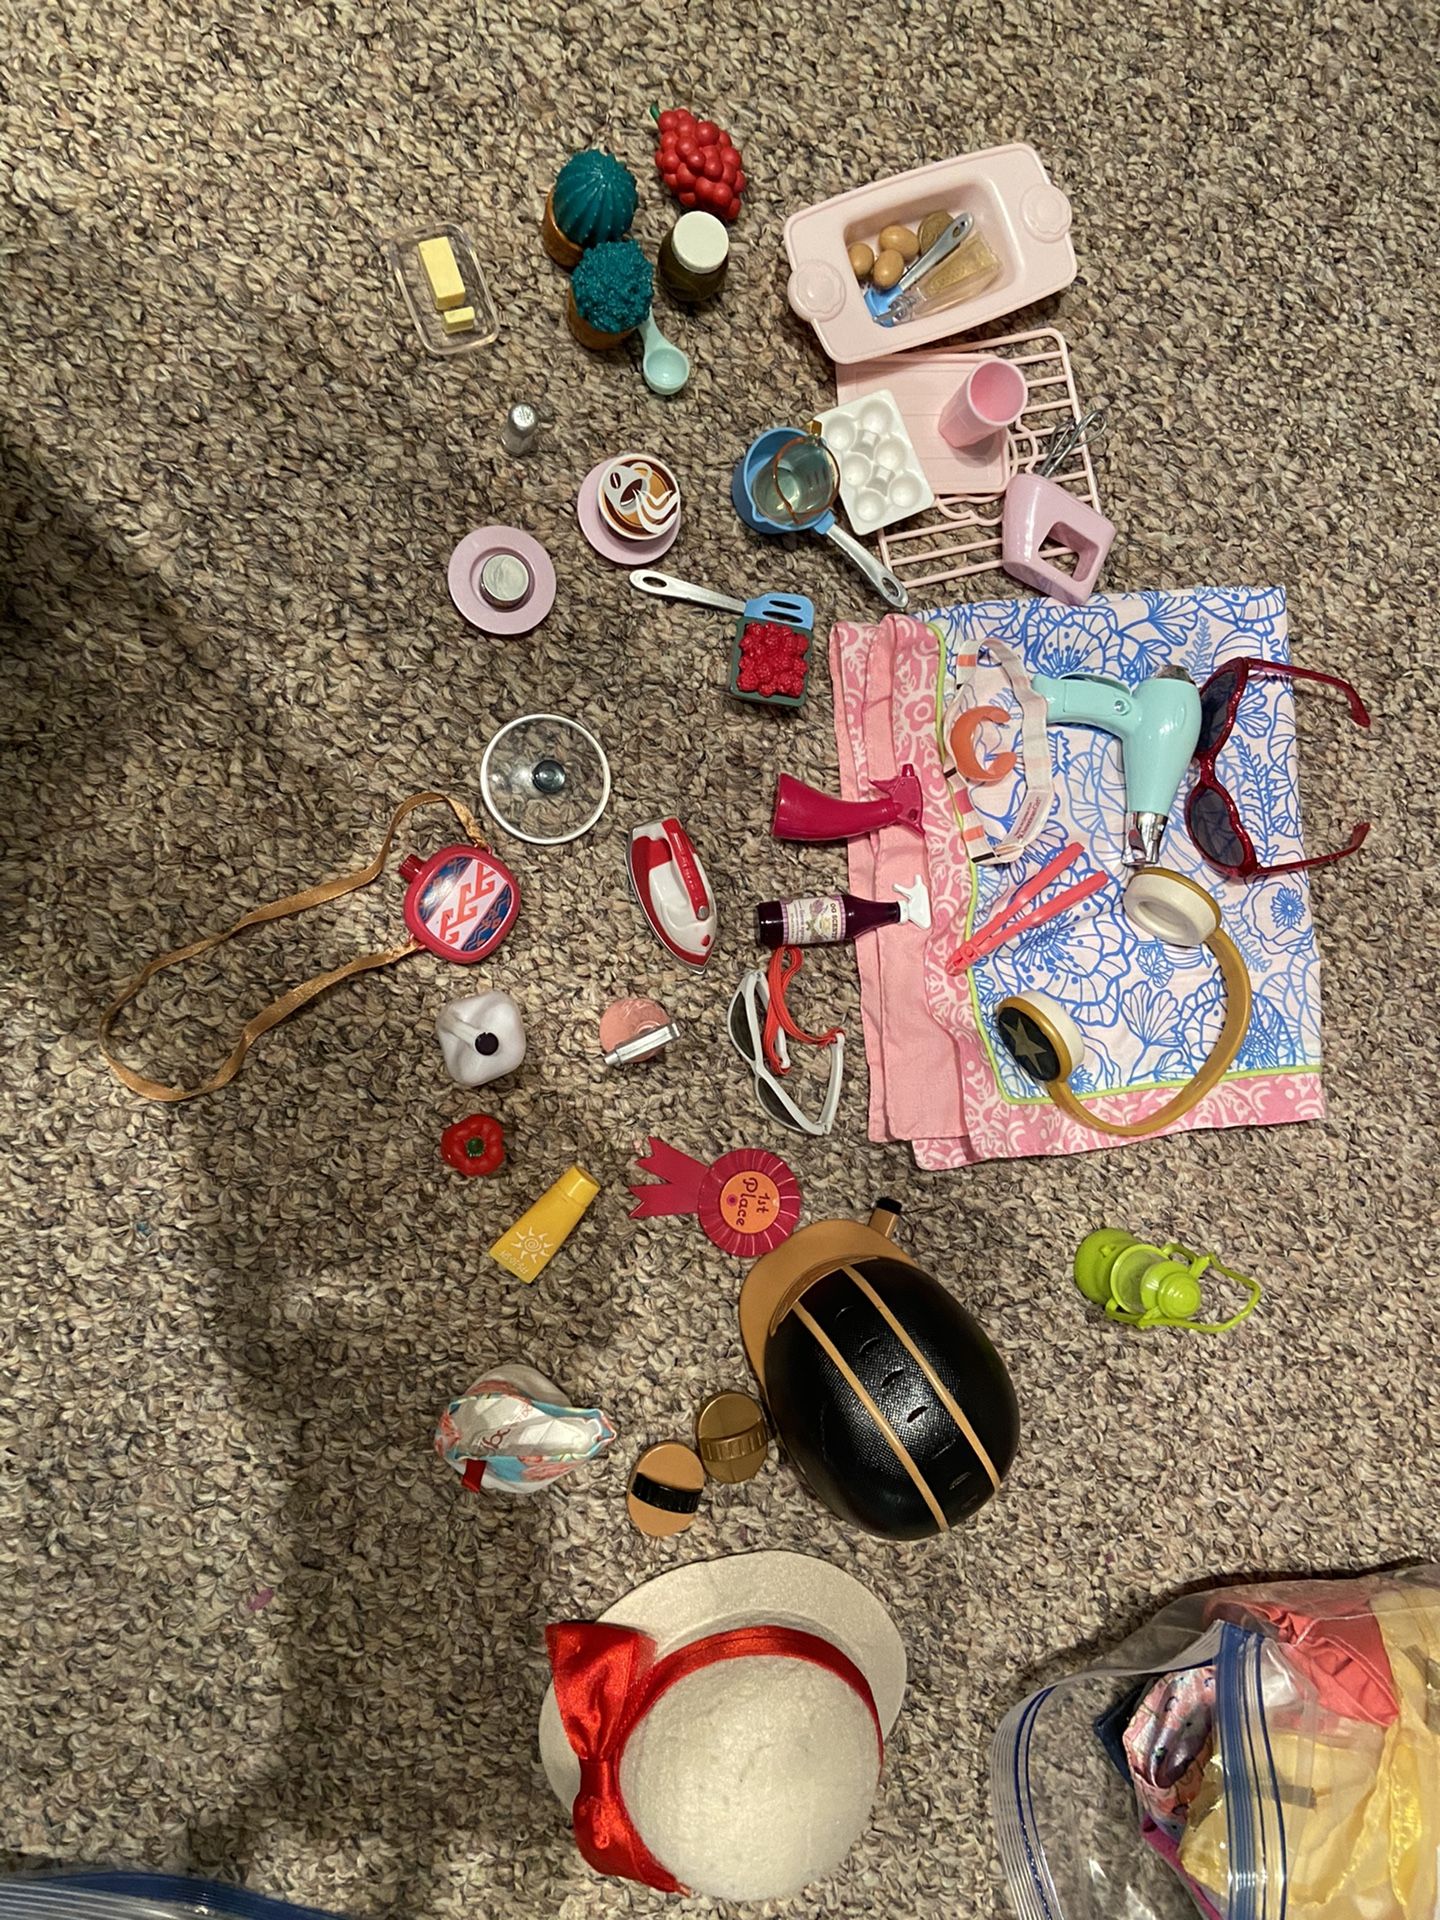 American Girl Doll Clothes/accessories